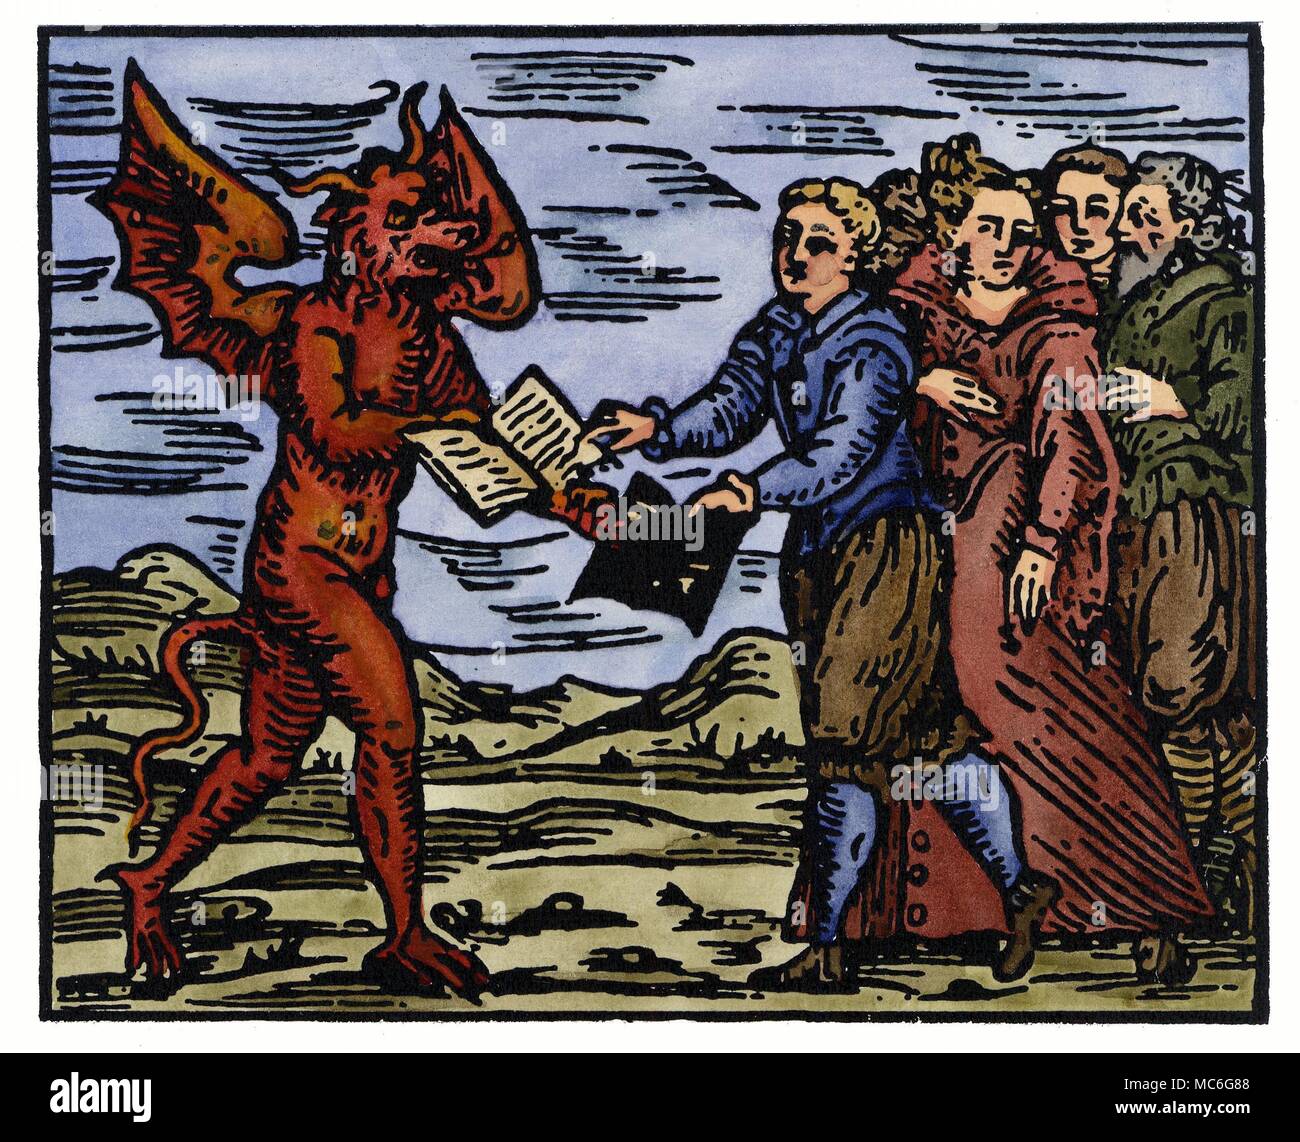 WITCHCRAFT - DEMONS The witches offering to the Devil a white book, in exchange for the black devil book. This symbolizes their wish that their names be struck from the Book of Life, and be inscribed in the Book of Death, kept by the Devil. Hand-coloured print from Francesco Maria Guazzo, Compendium Maleficarum, 1608. This was the most learned and precise of mediaeval witchcraft manuals, and in some respects (because it paid homage to the superstitions of the worst kind) one of the most horrible. Stock Photo